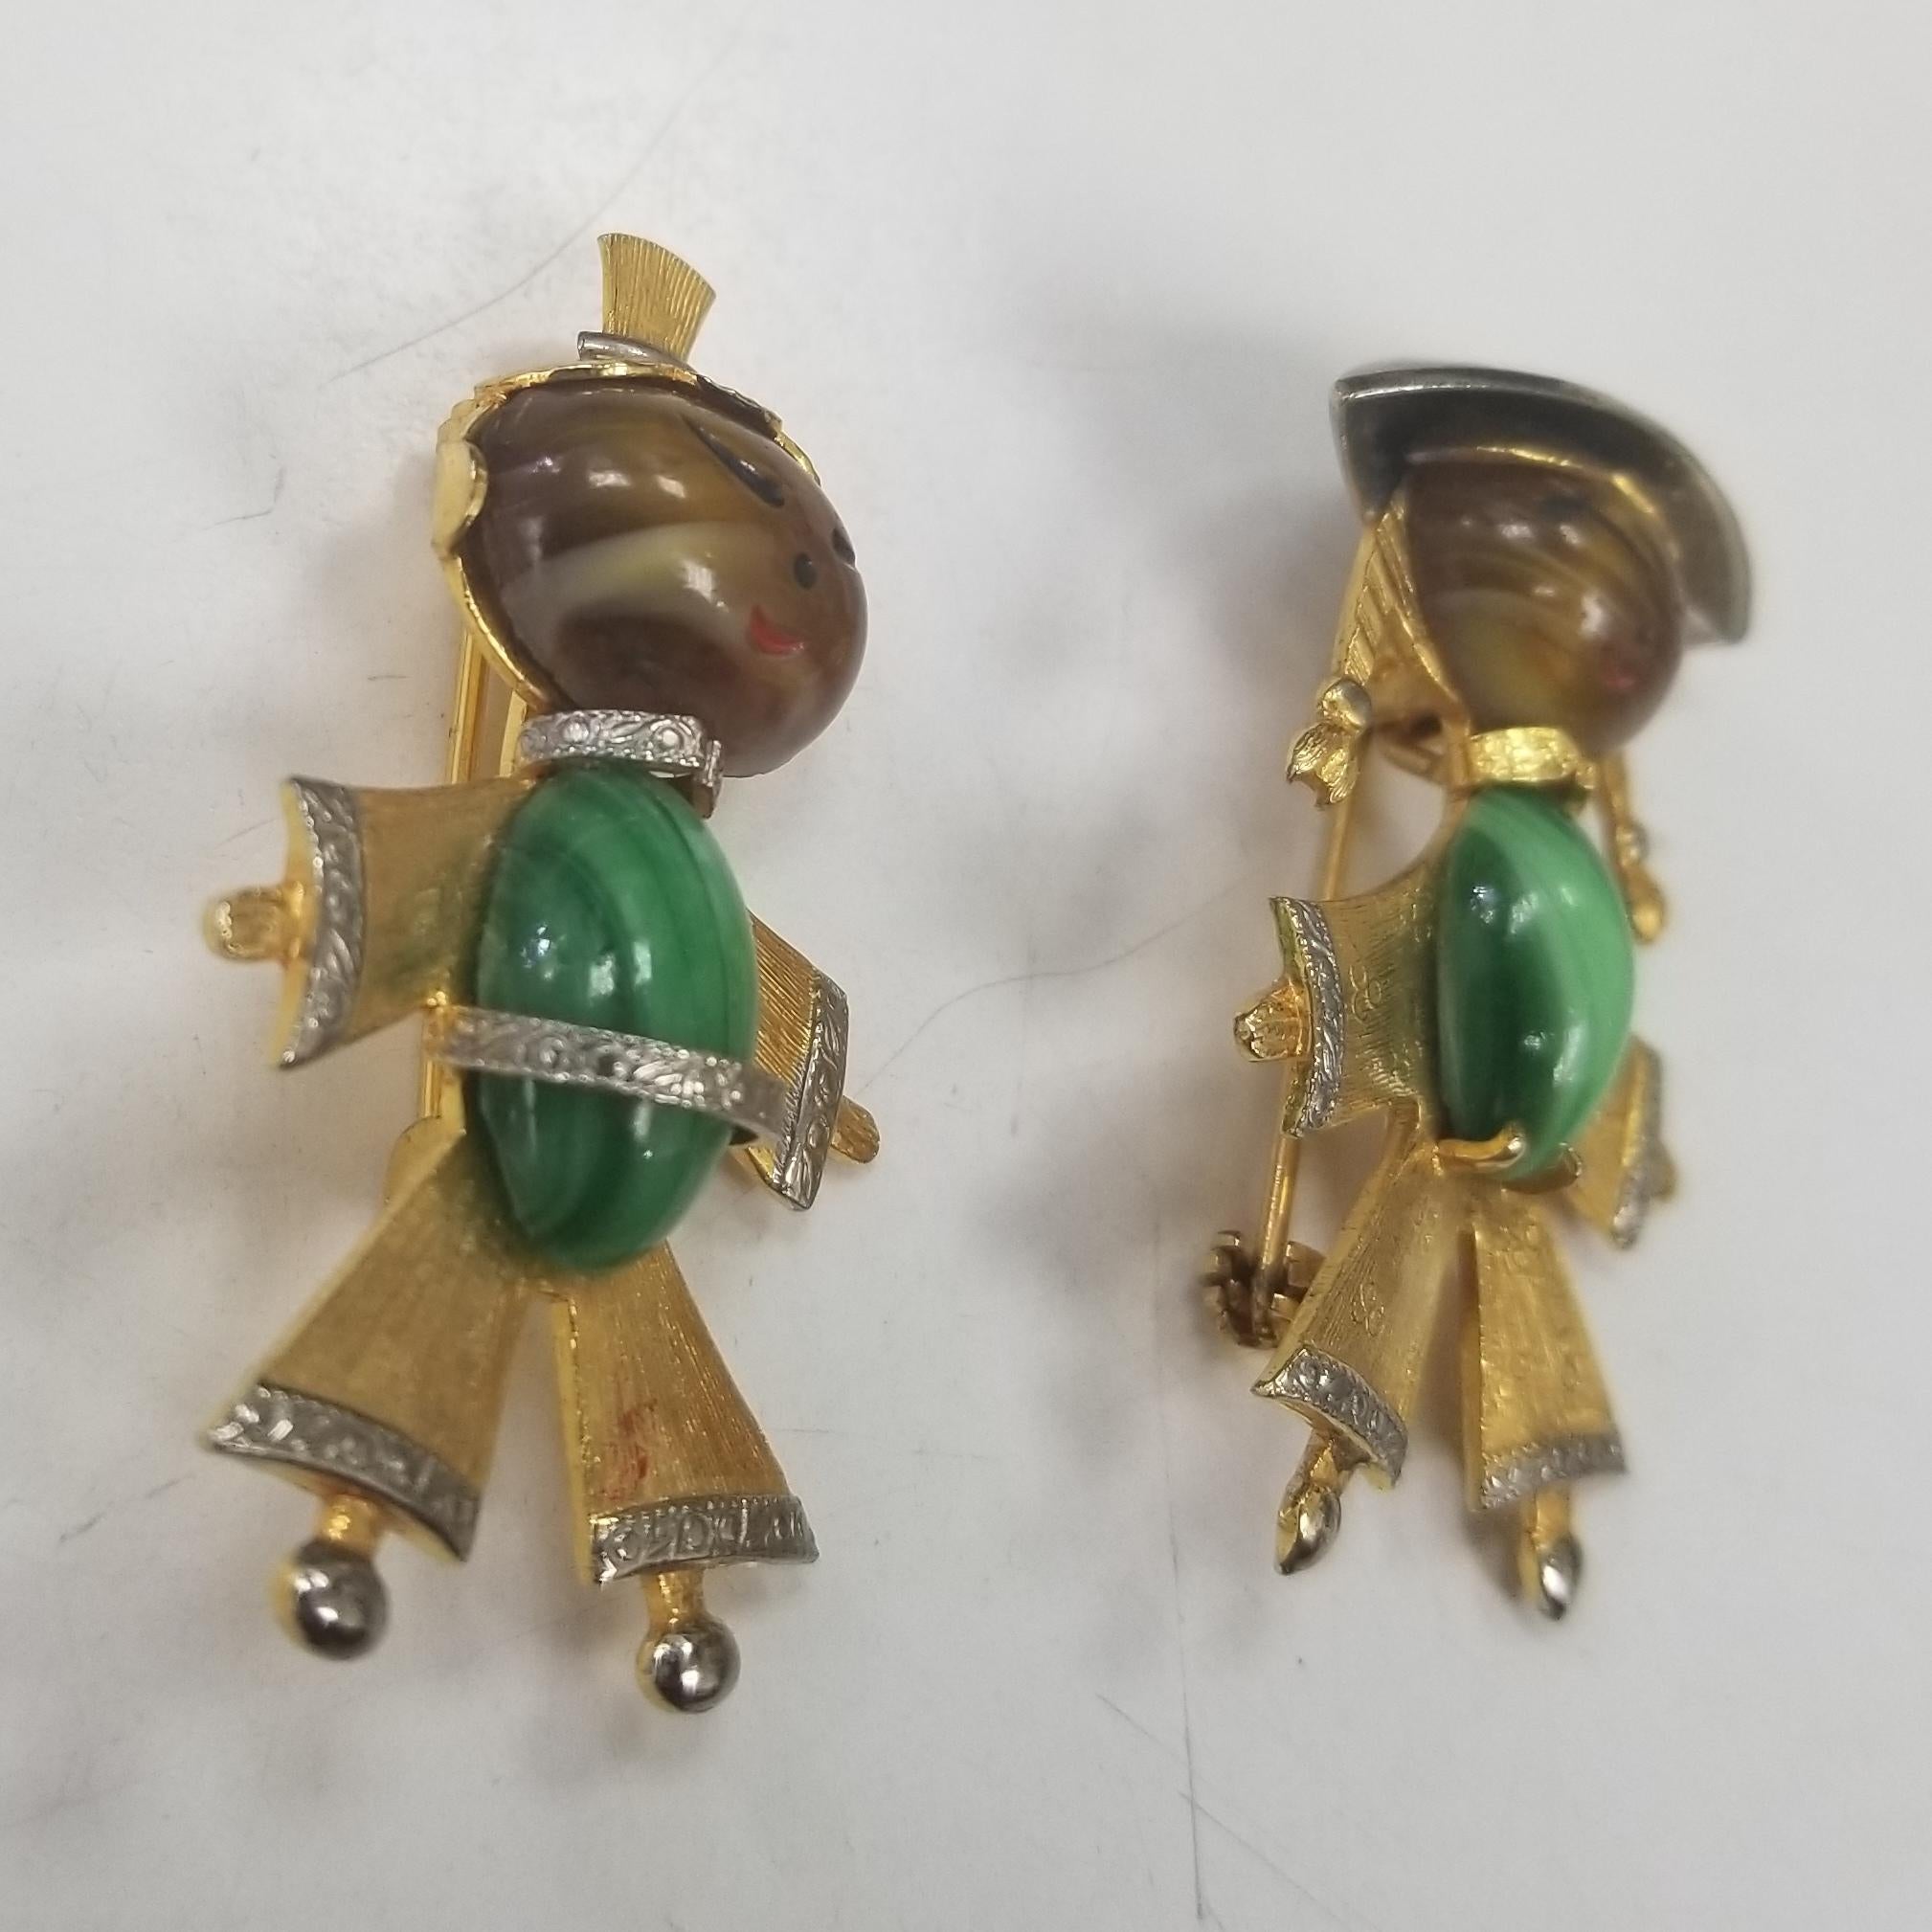 These wonderful vintage pins,  feature the design of an Asian lady and man in a gold tone finish with inset malichite.